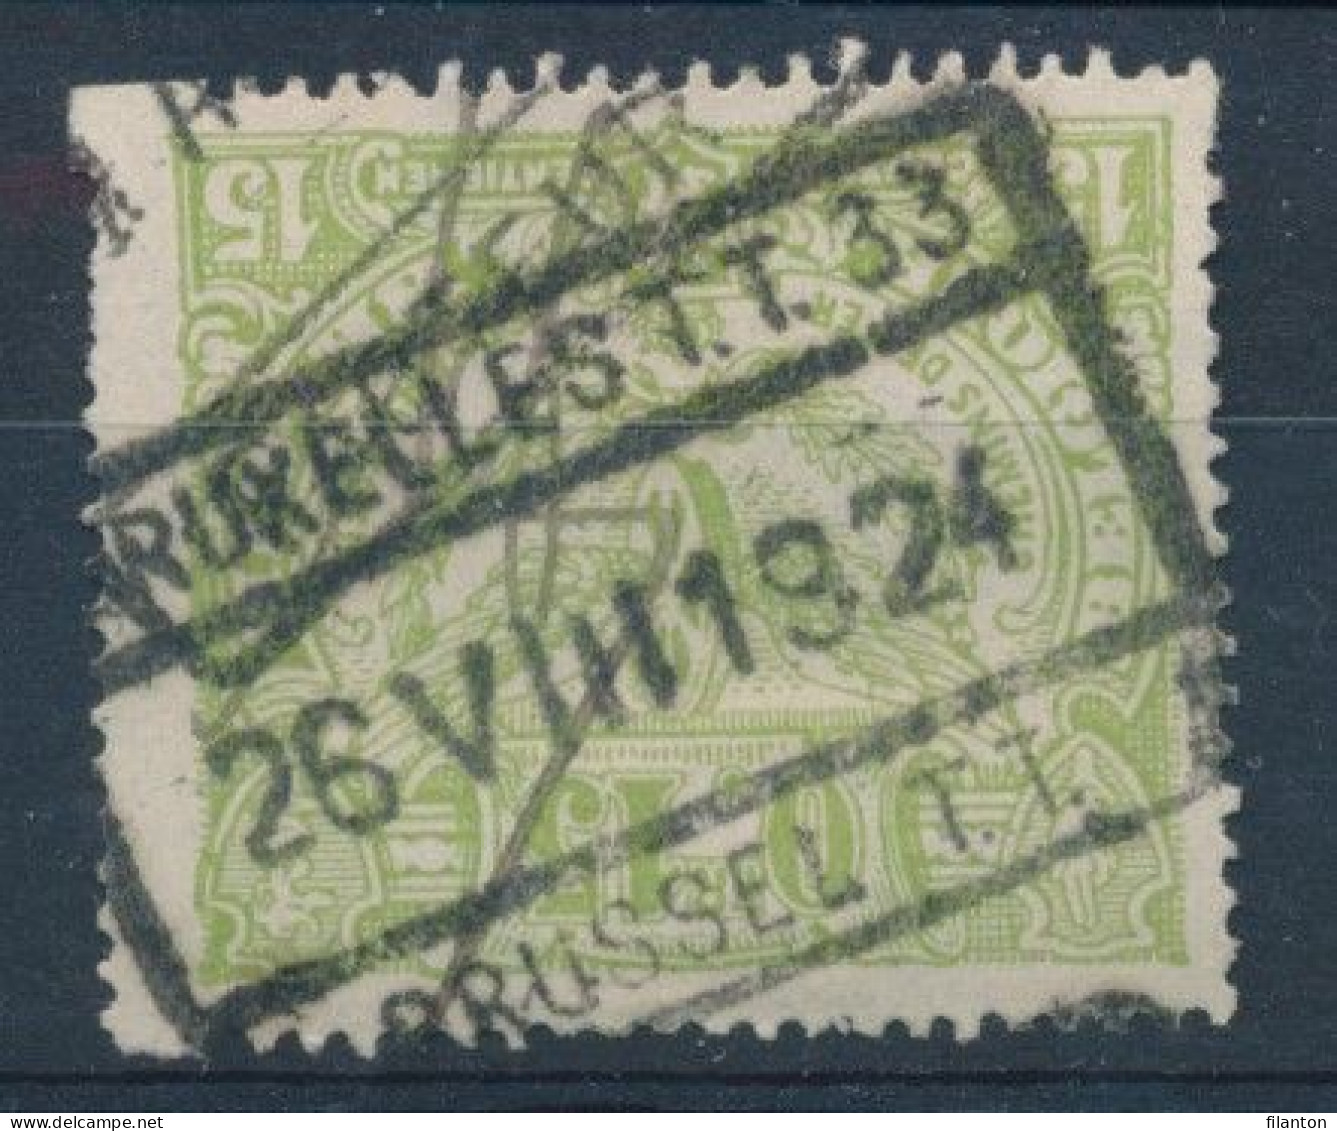 TR  101 -  "BRUXELLES-T.T. 33 - BRUSSEL-T.T." - (ref. 37.414) - Used